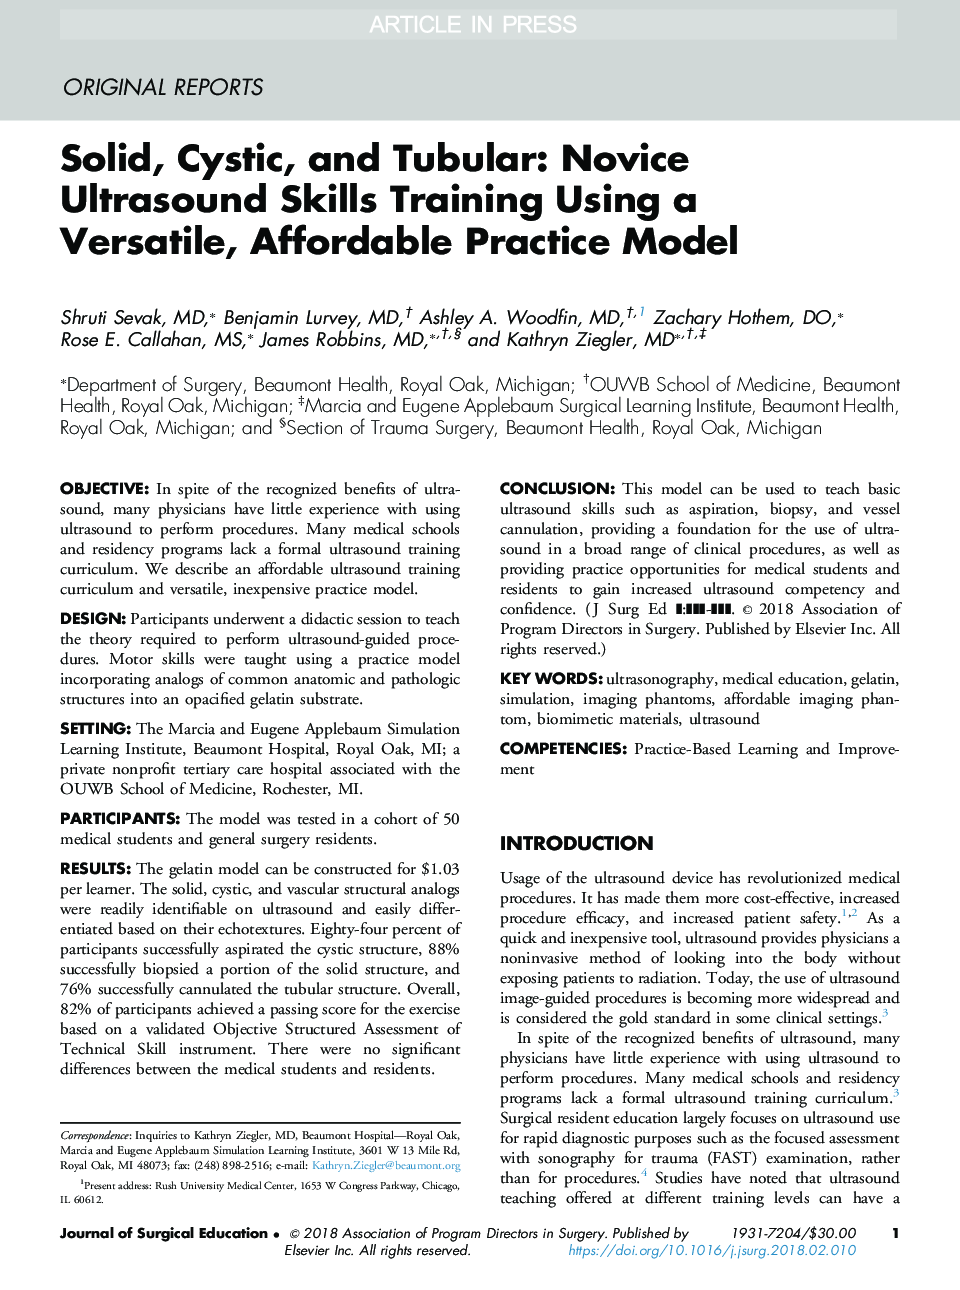 Solid, Cystic, and Tubular: Novice Ultrasound Skills Training Using a Versatile, Affordable Practice Model